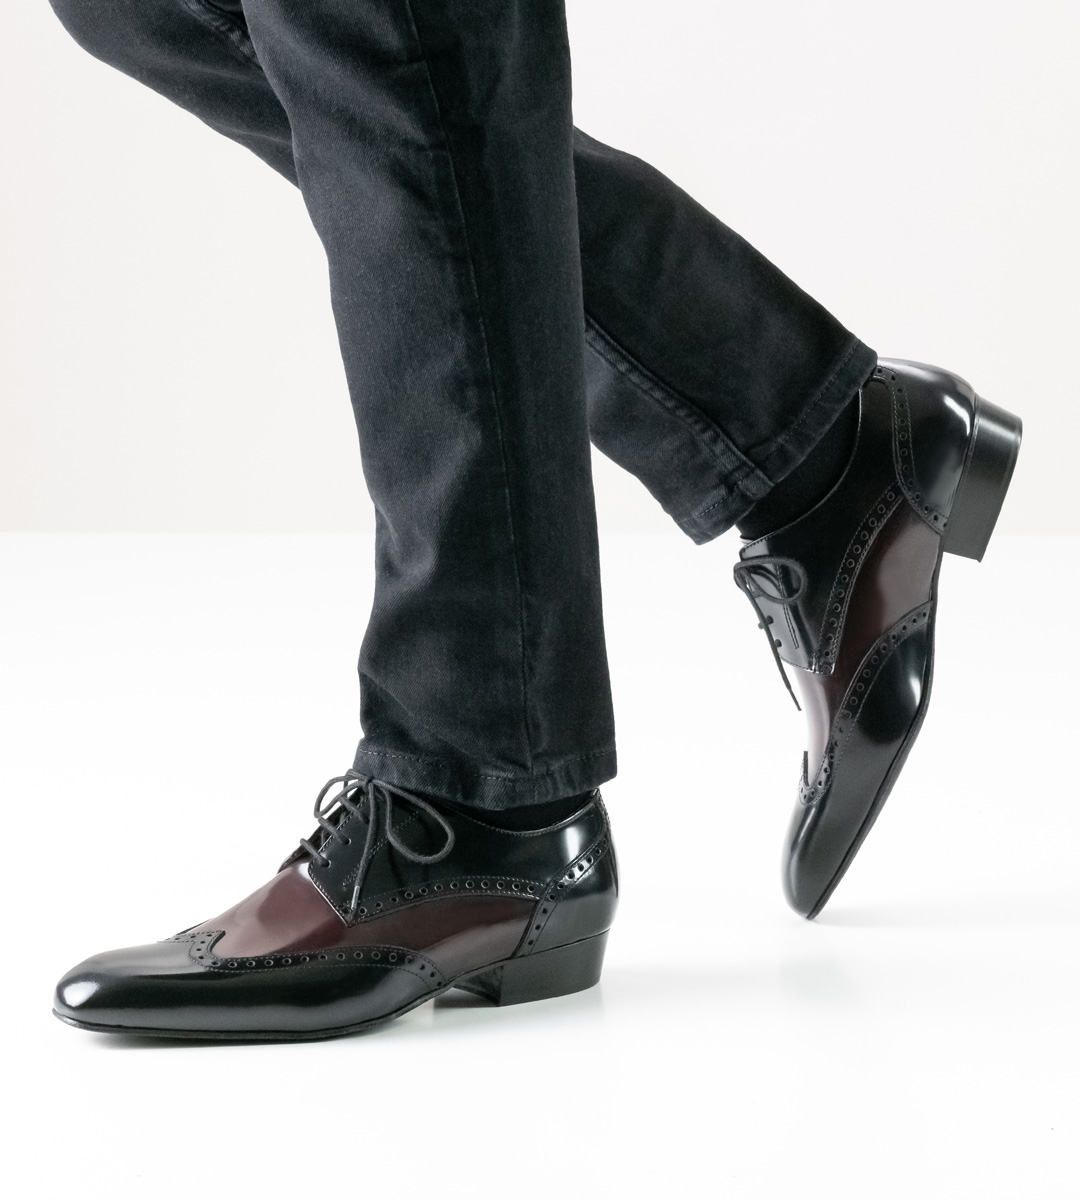 Front view of the Nueva Epoca men's dance shoe in combination with black trousers